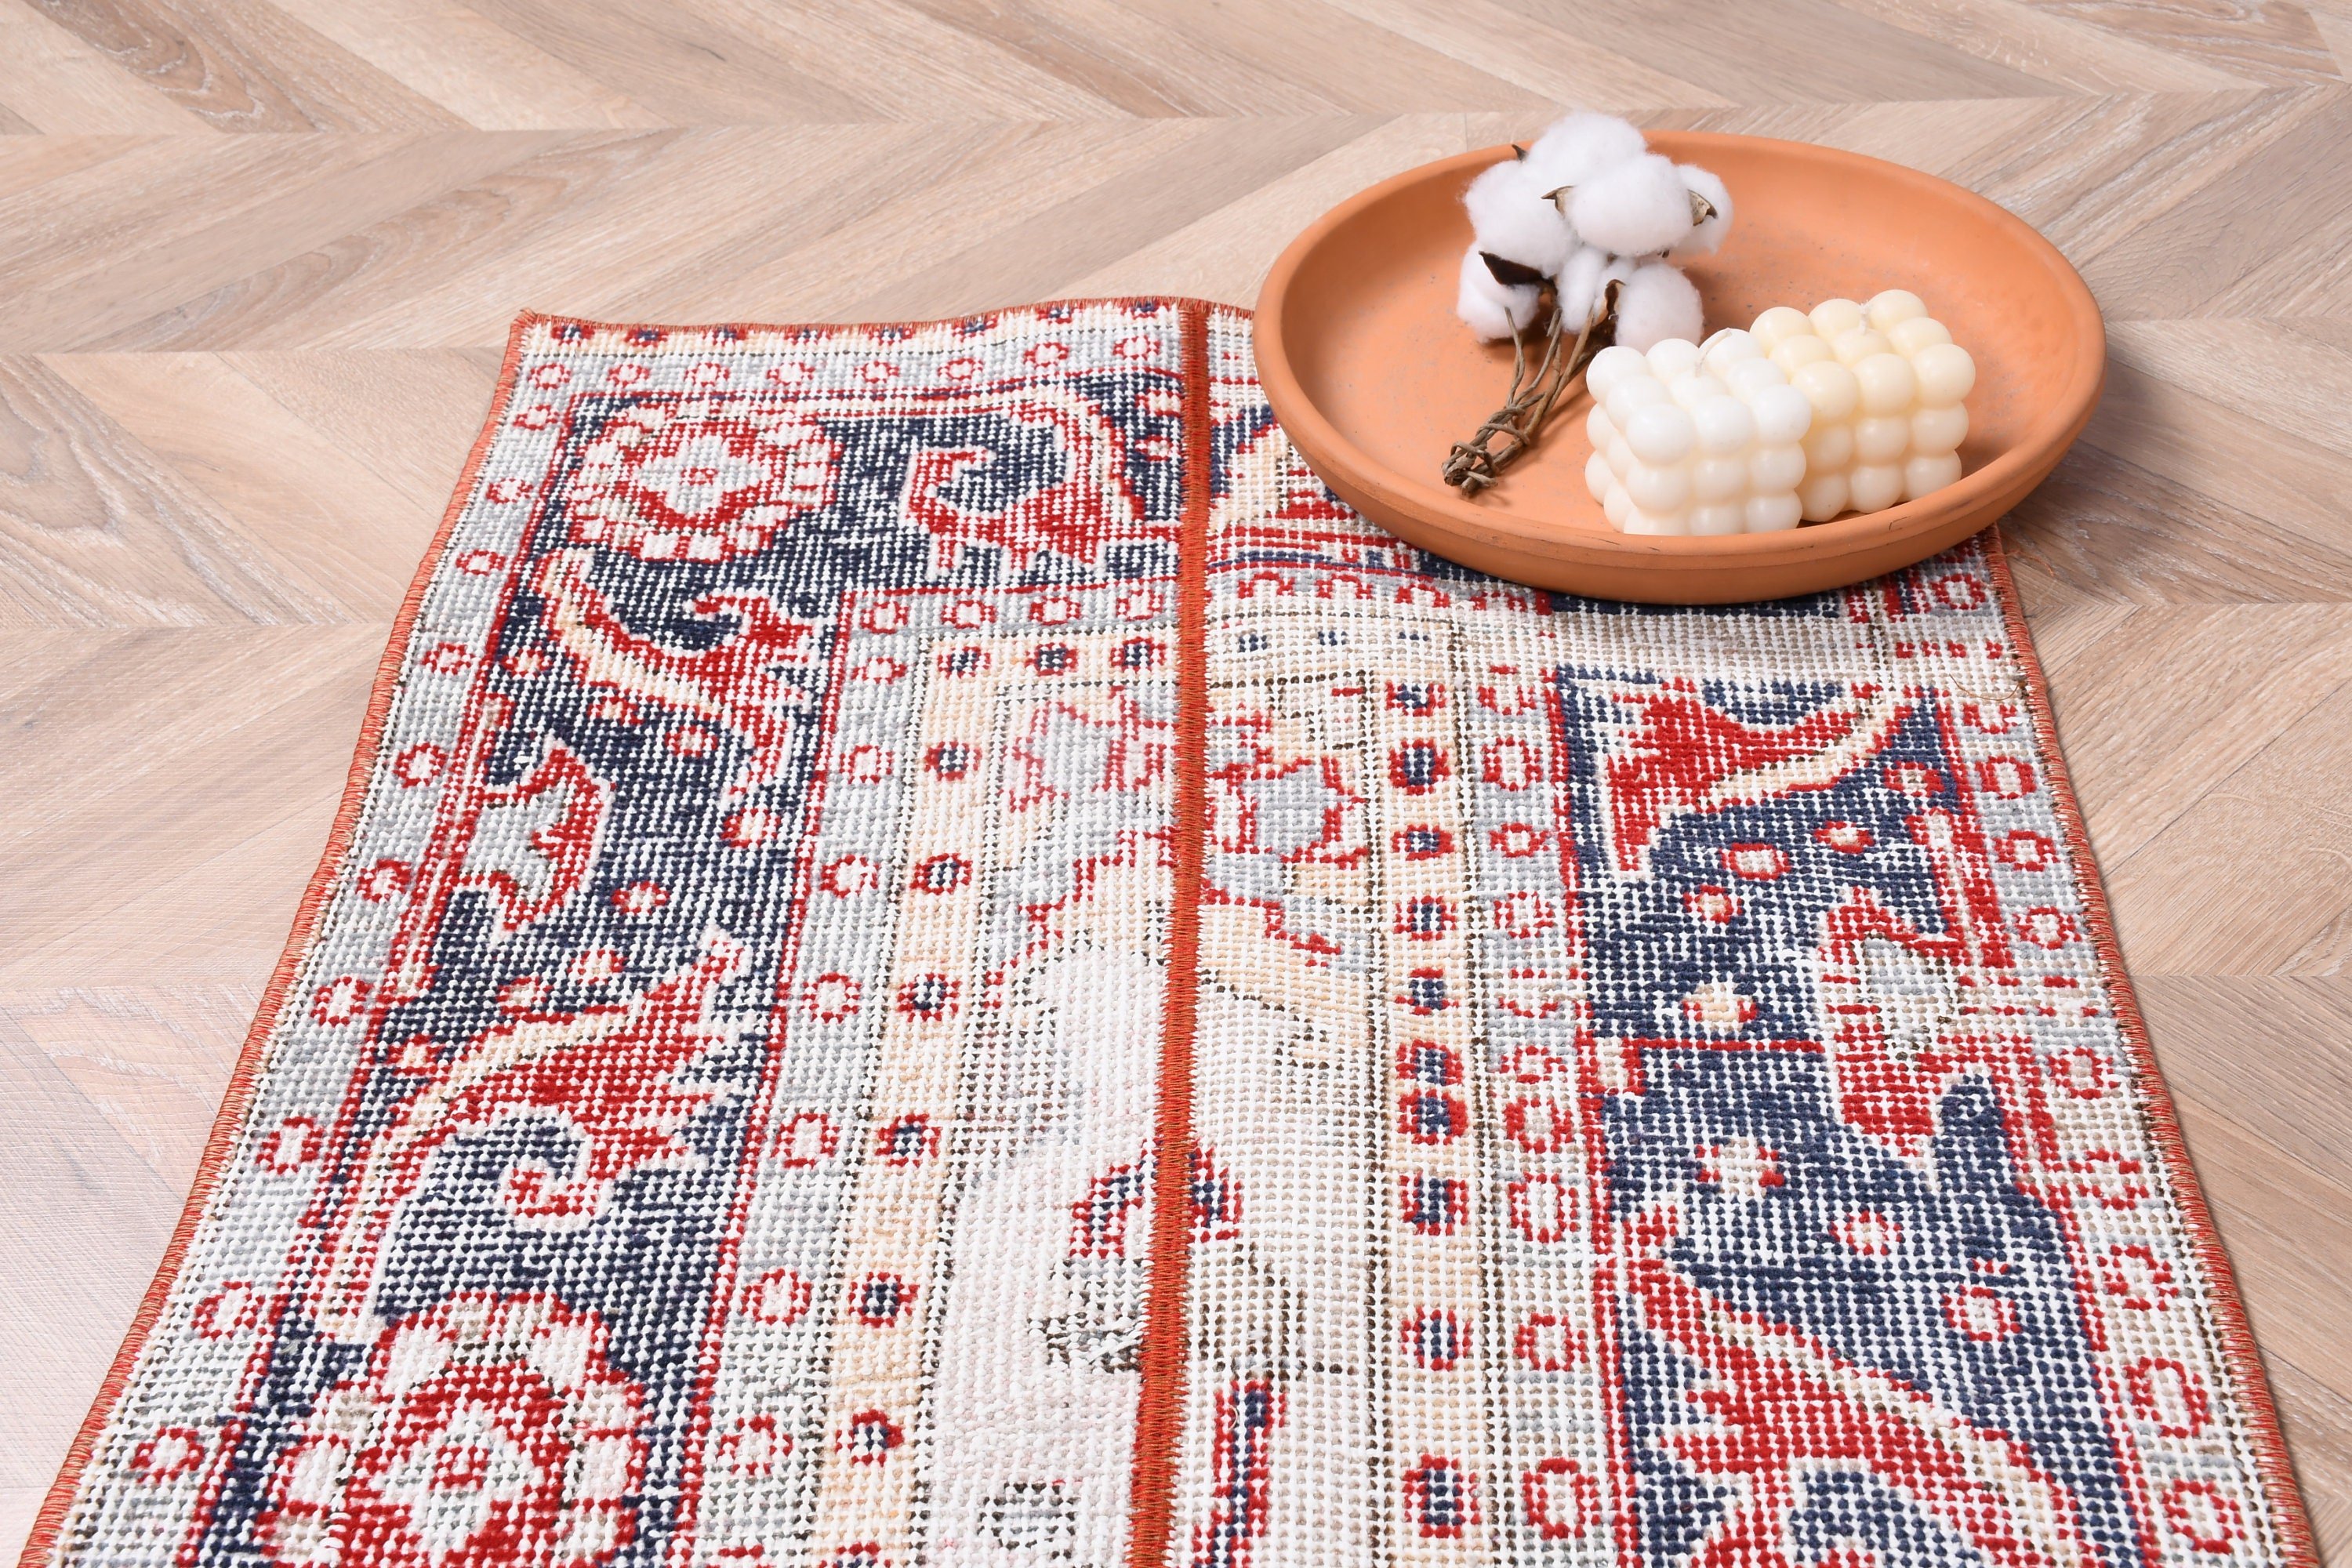 Kitchen Rug, Turkish Rugs, Red Floor Rugs, 1.8x4.5 ft Small Rug, Ethnic Rug, Vintage Rugs, Wall Hanging Rug, Home Decor Rug